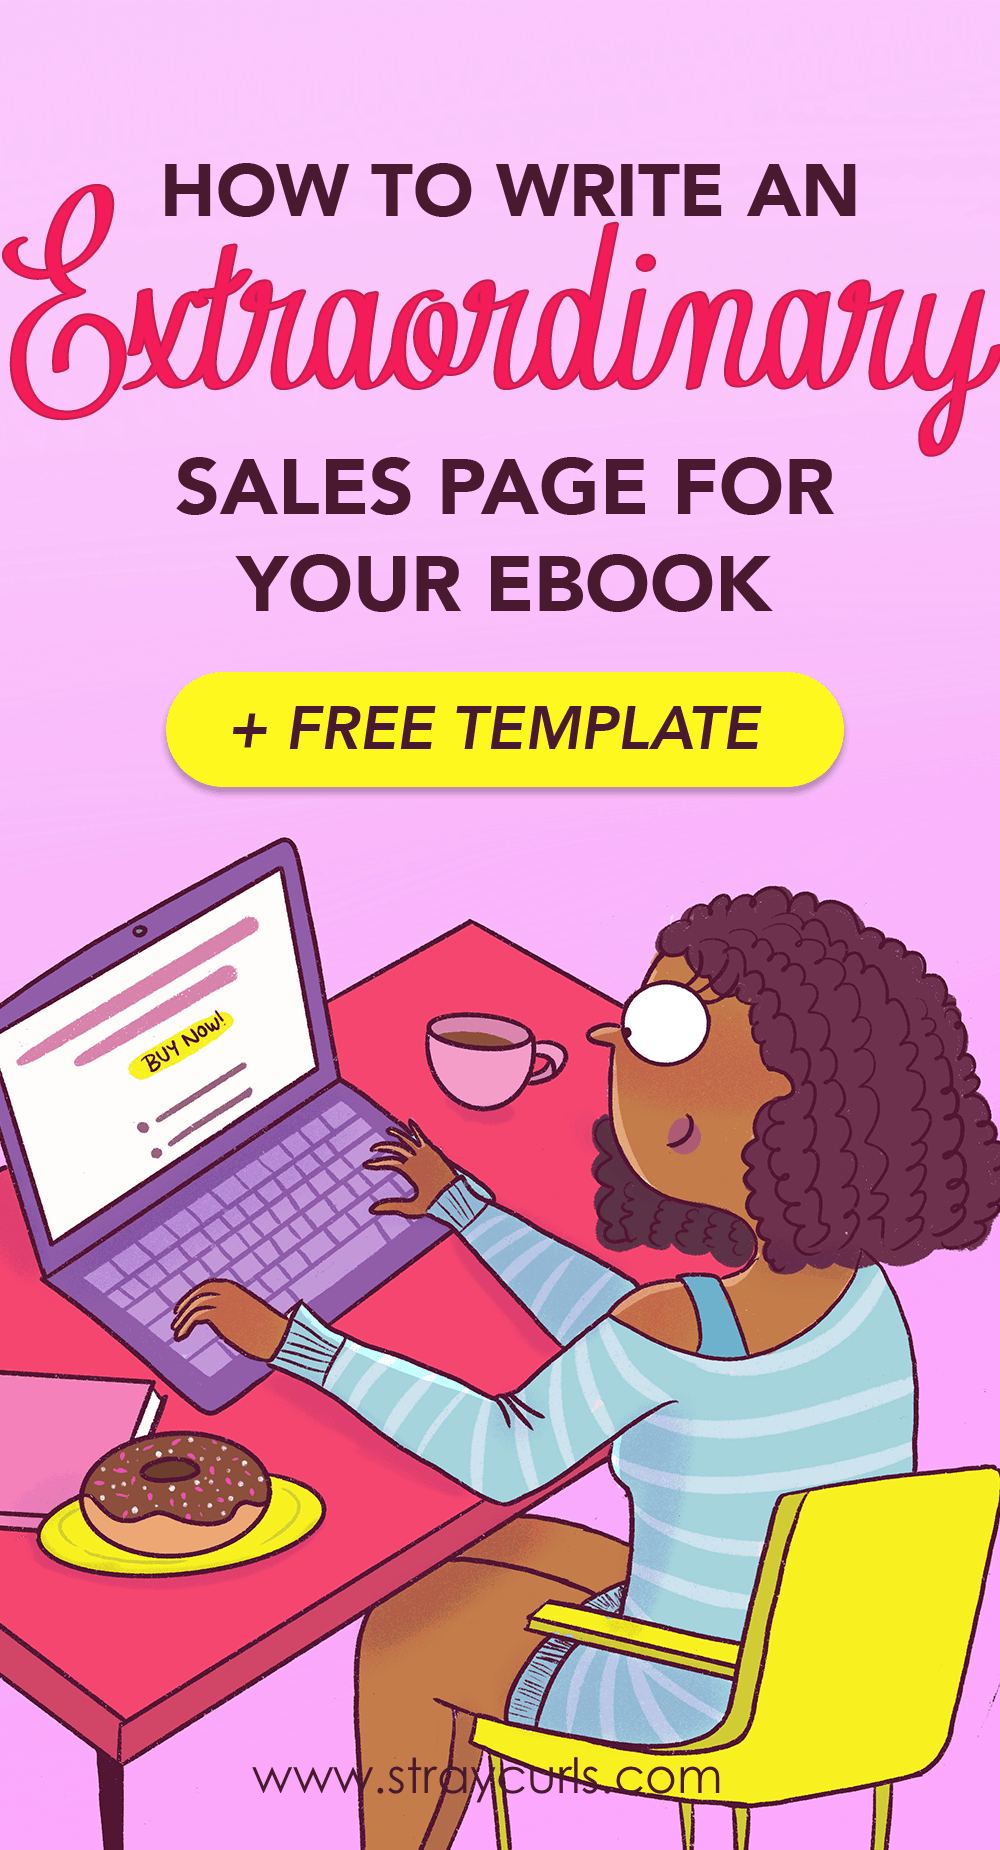 Wrote an ebook but getting zero sales? That's because your Sales Page is not converting readers into customers. Learn how to write a sales page for your eBook in this extremely comprehensive post! This post covers the exact sales page design you need. Grab by free sales page template to help you write your own sales page! #design #template #layout #salespage